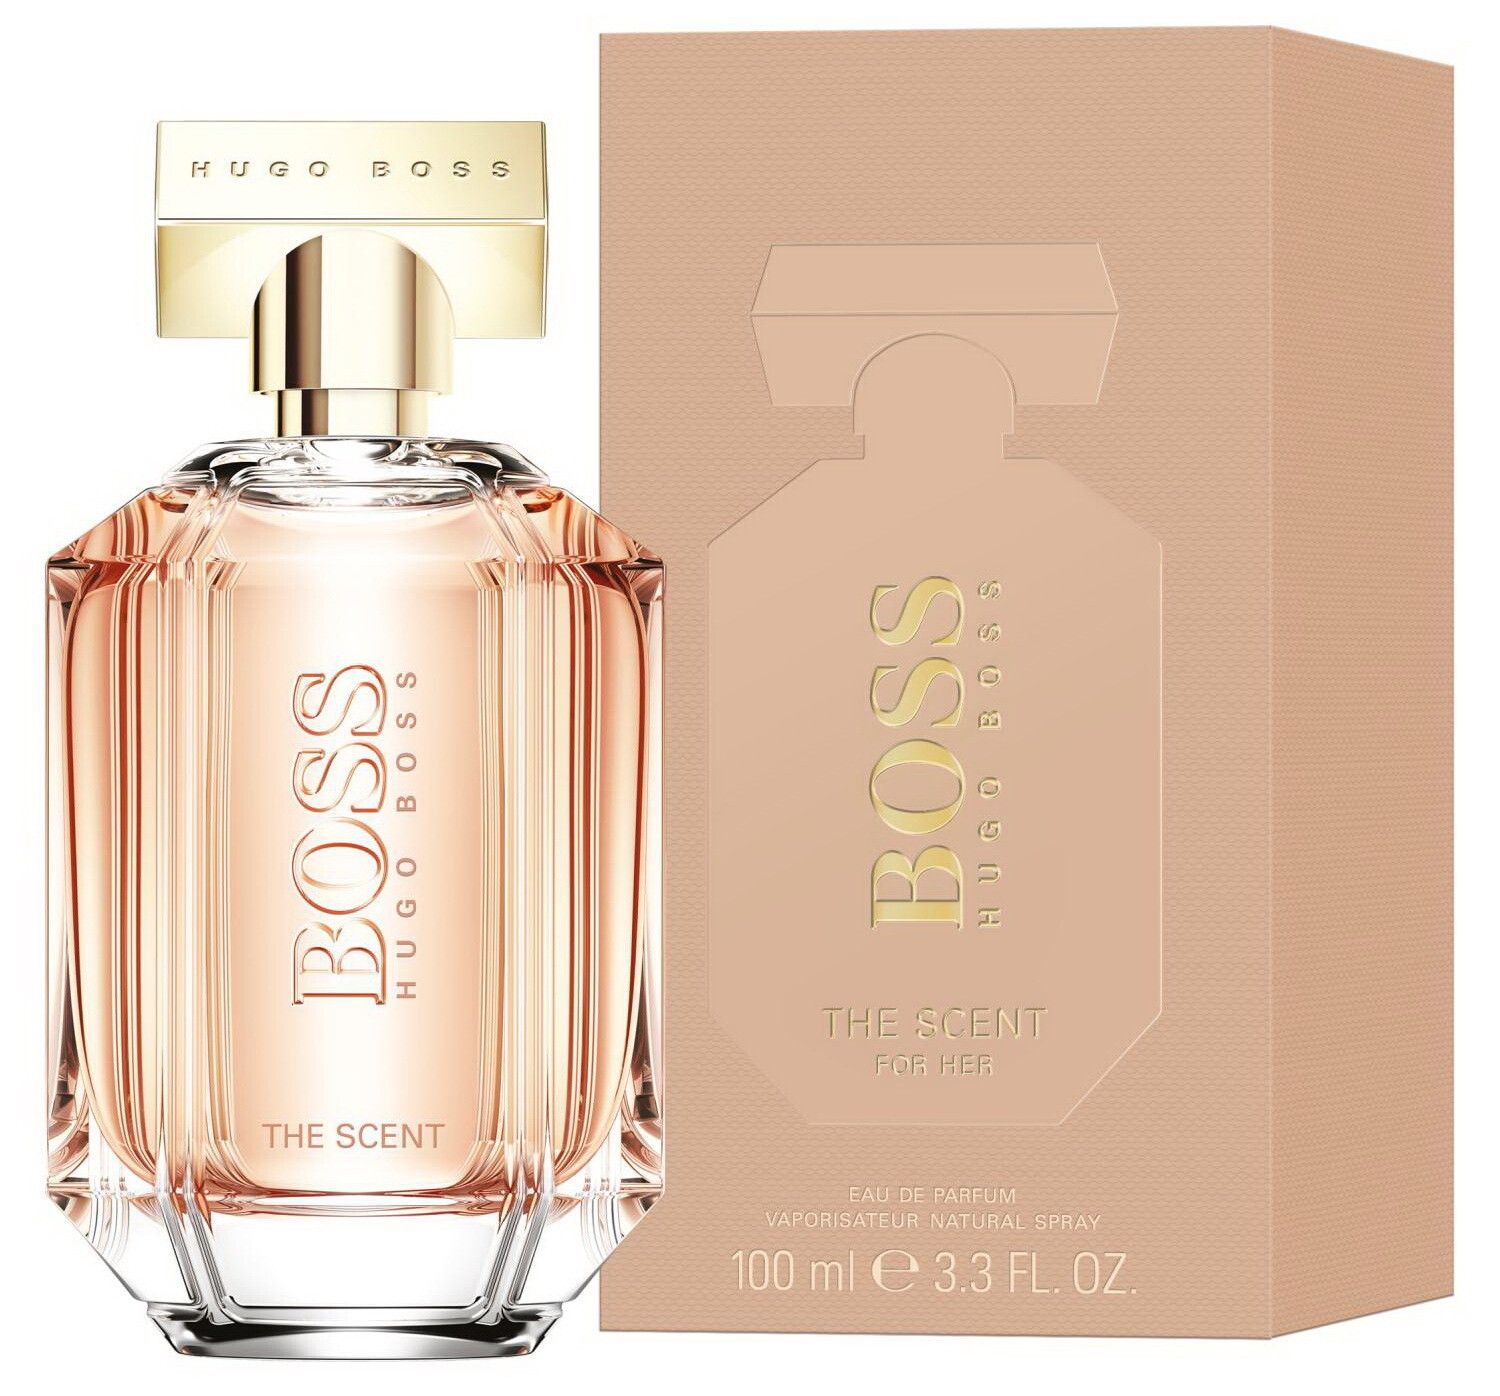 The Scent for Her - Hugo Boss